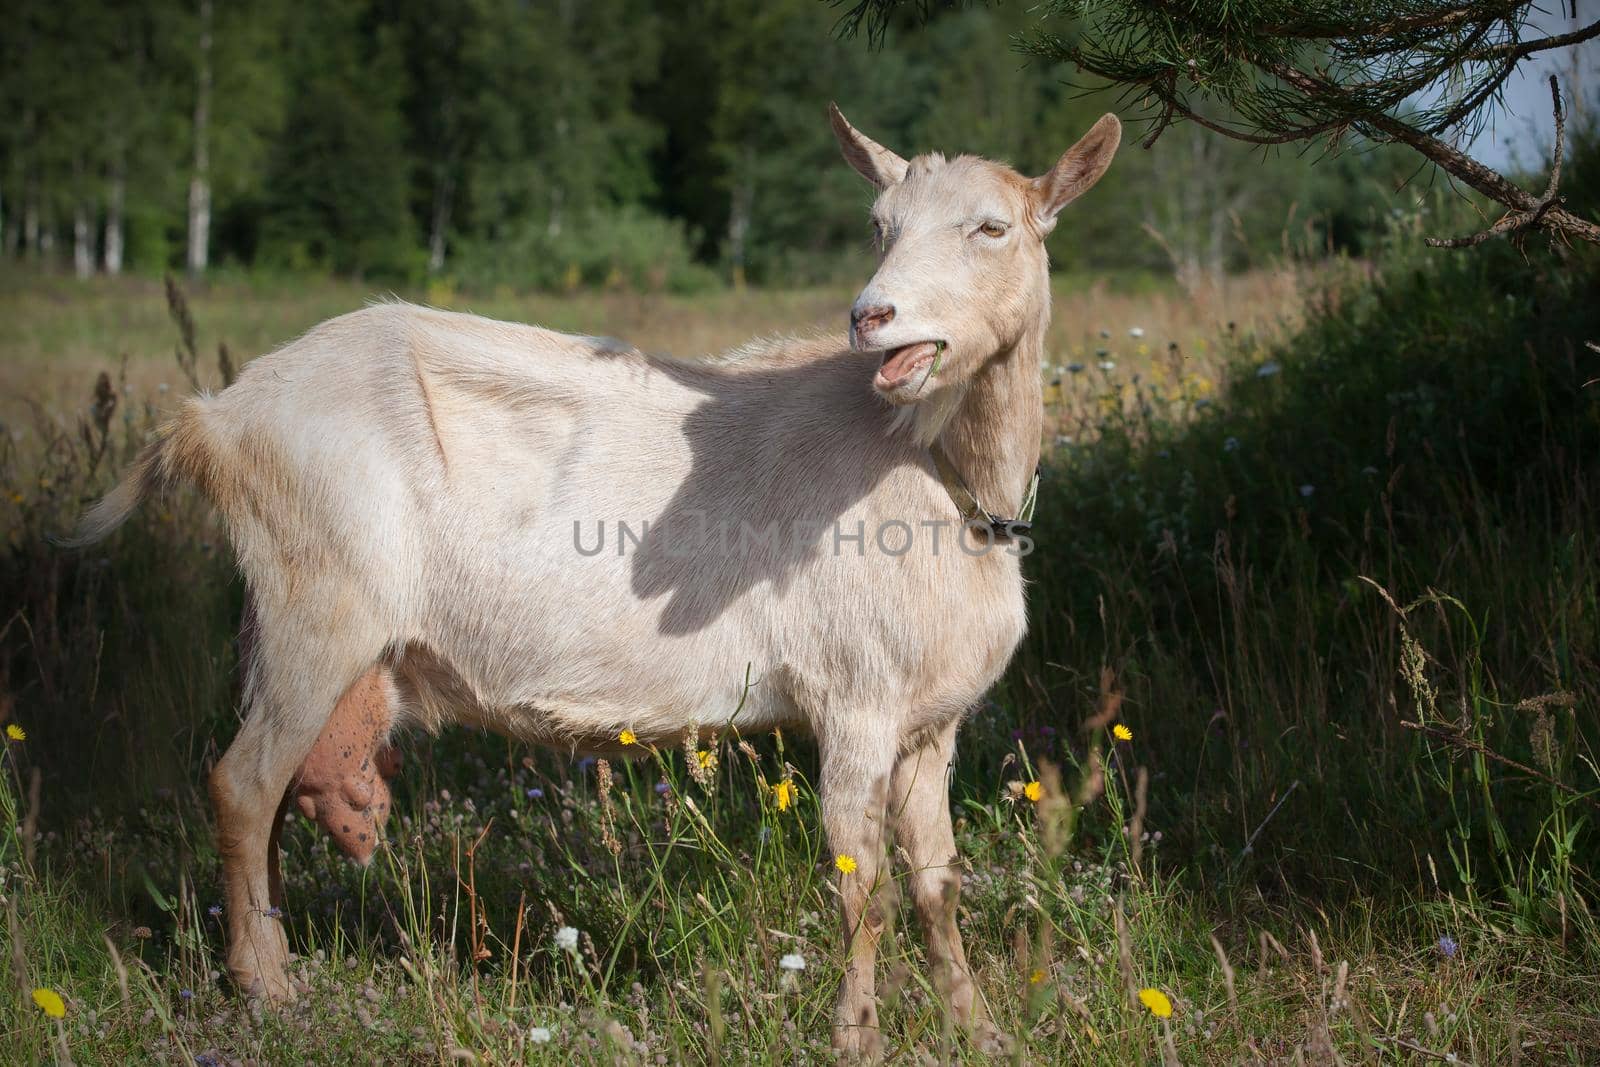 Goat with a big udder eats pine needles by Lincikas